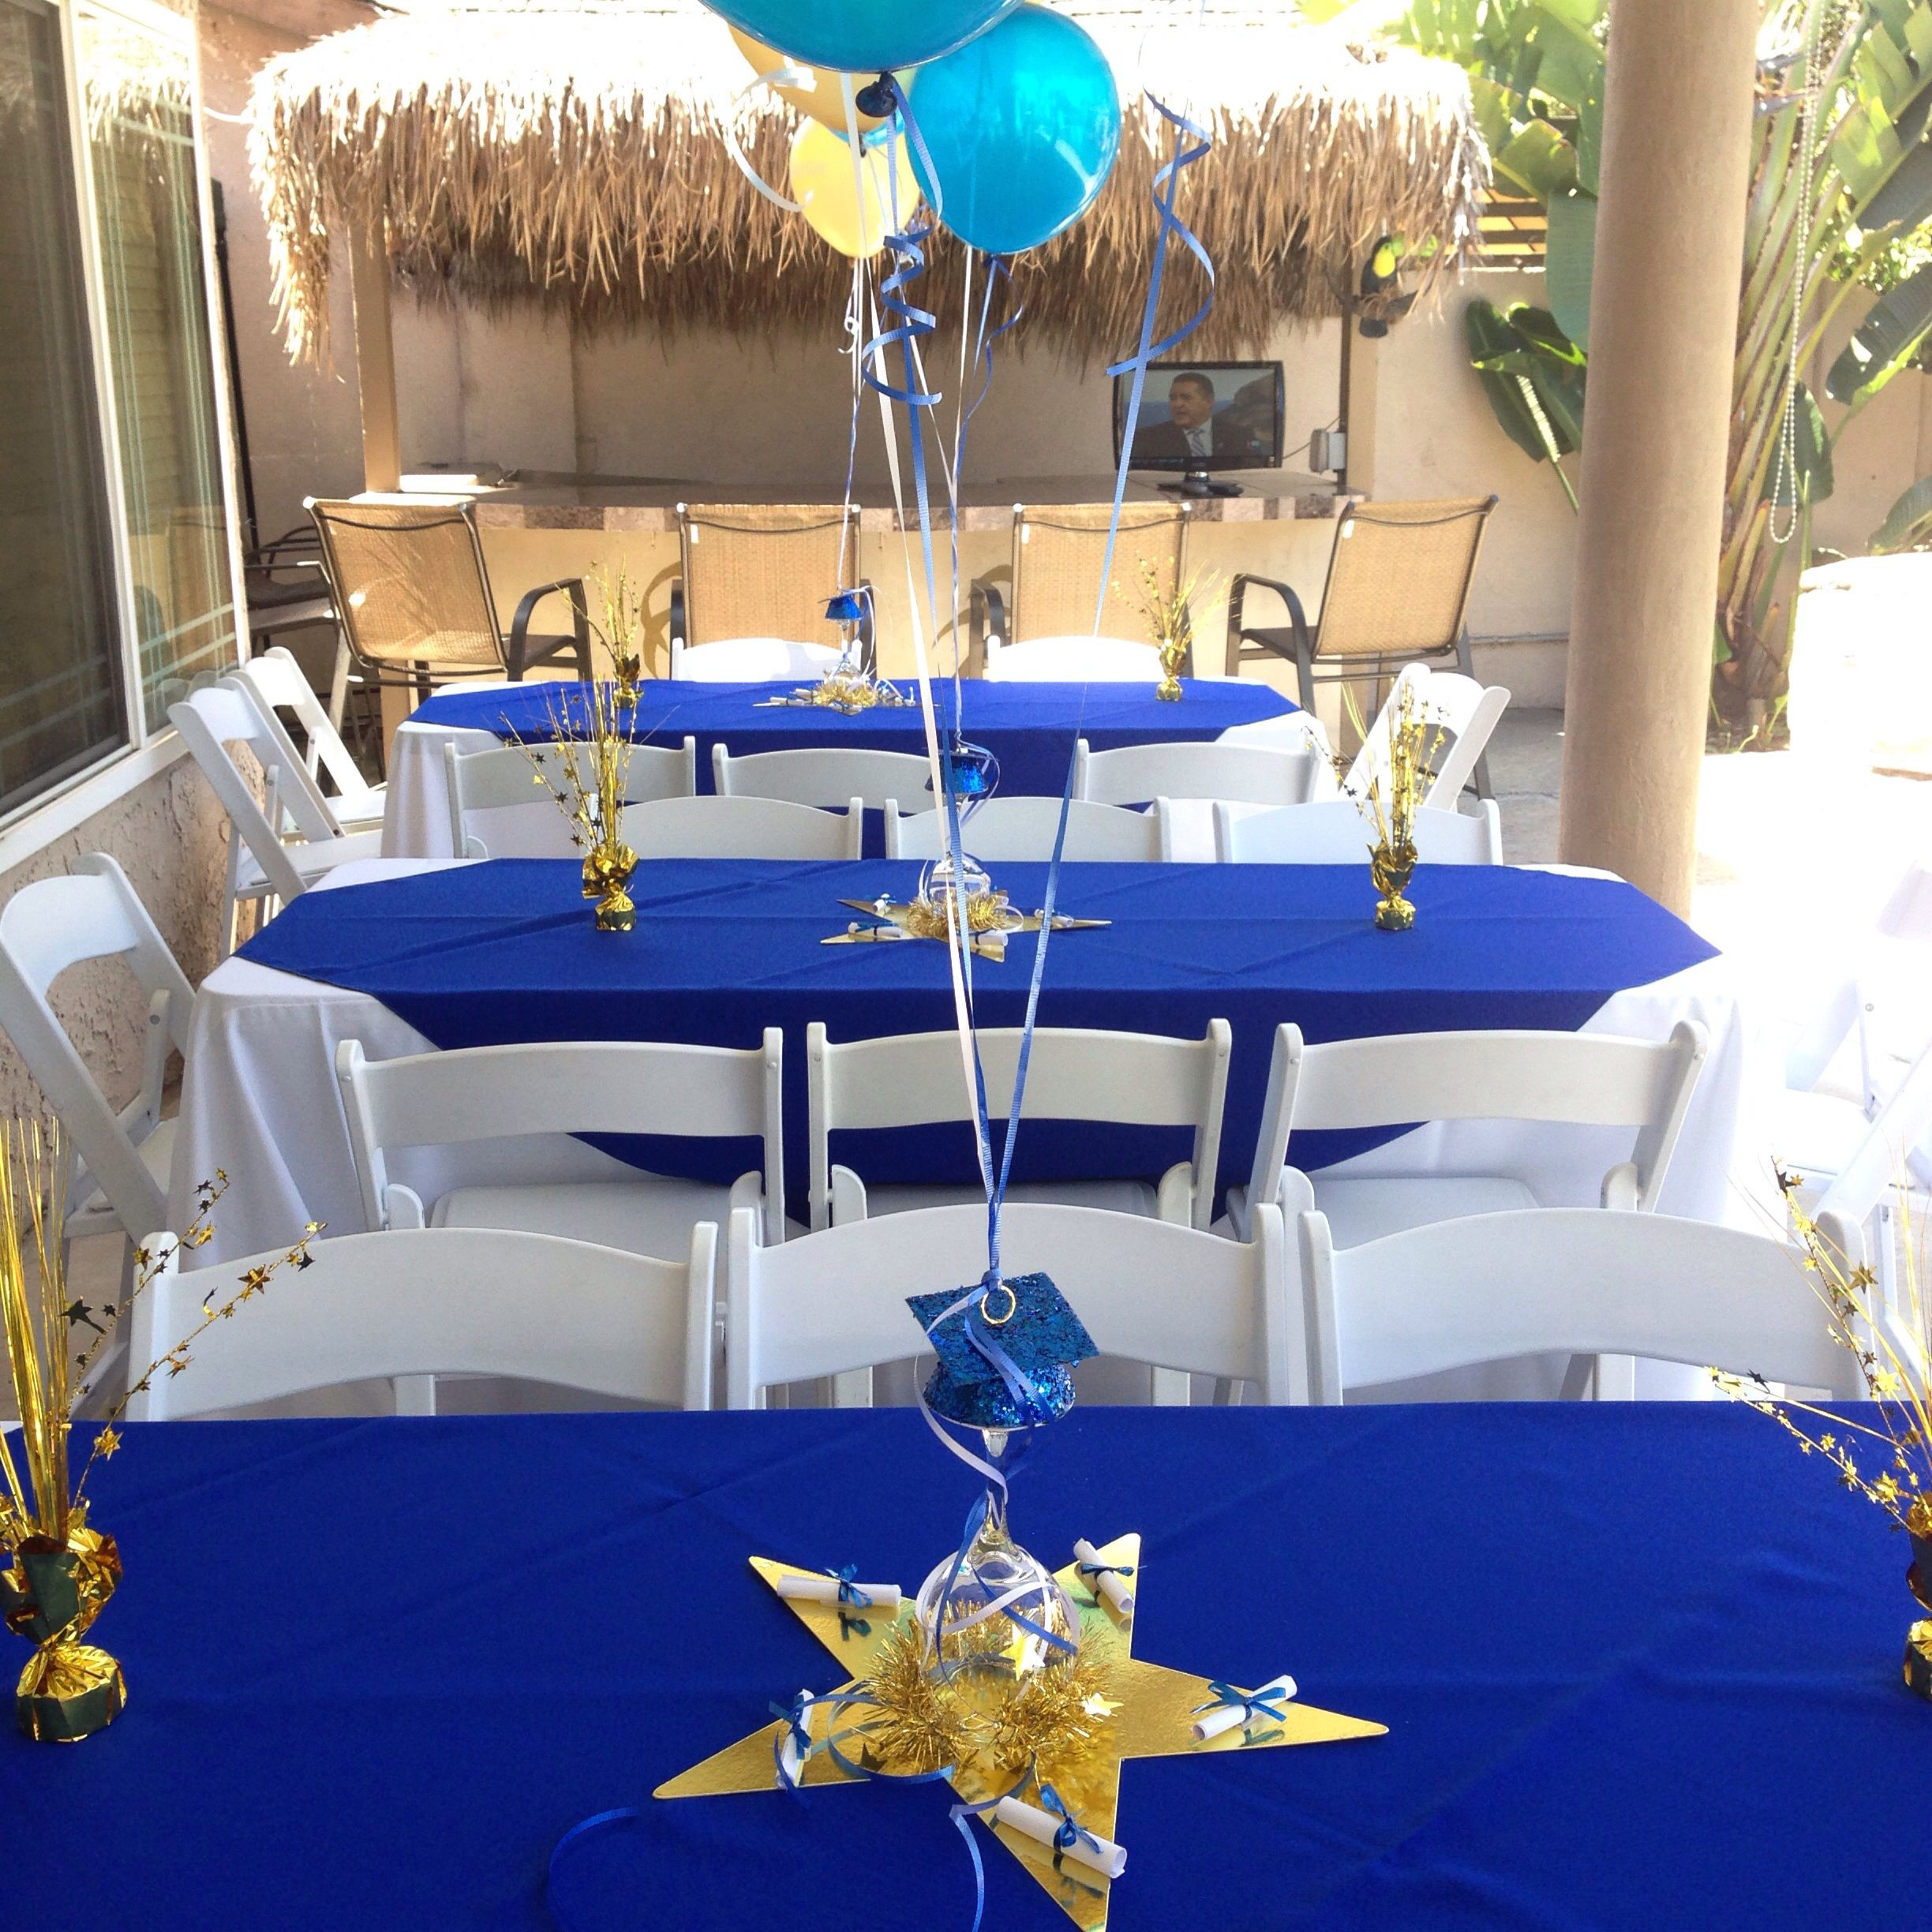 Table Decoration Ideas For High School Graduation Party
 Table Decoration Ideas For High School Graduation Party